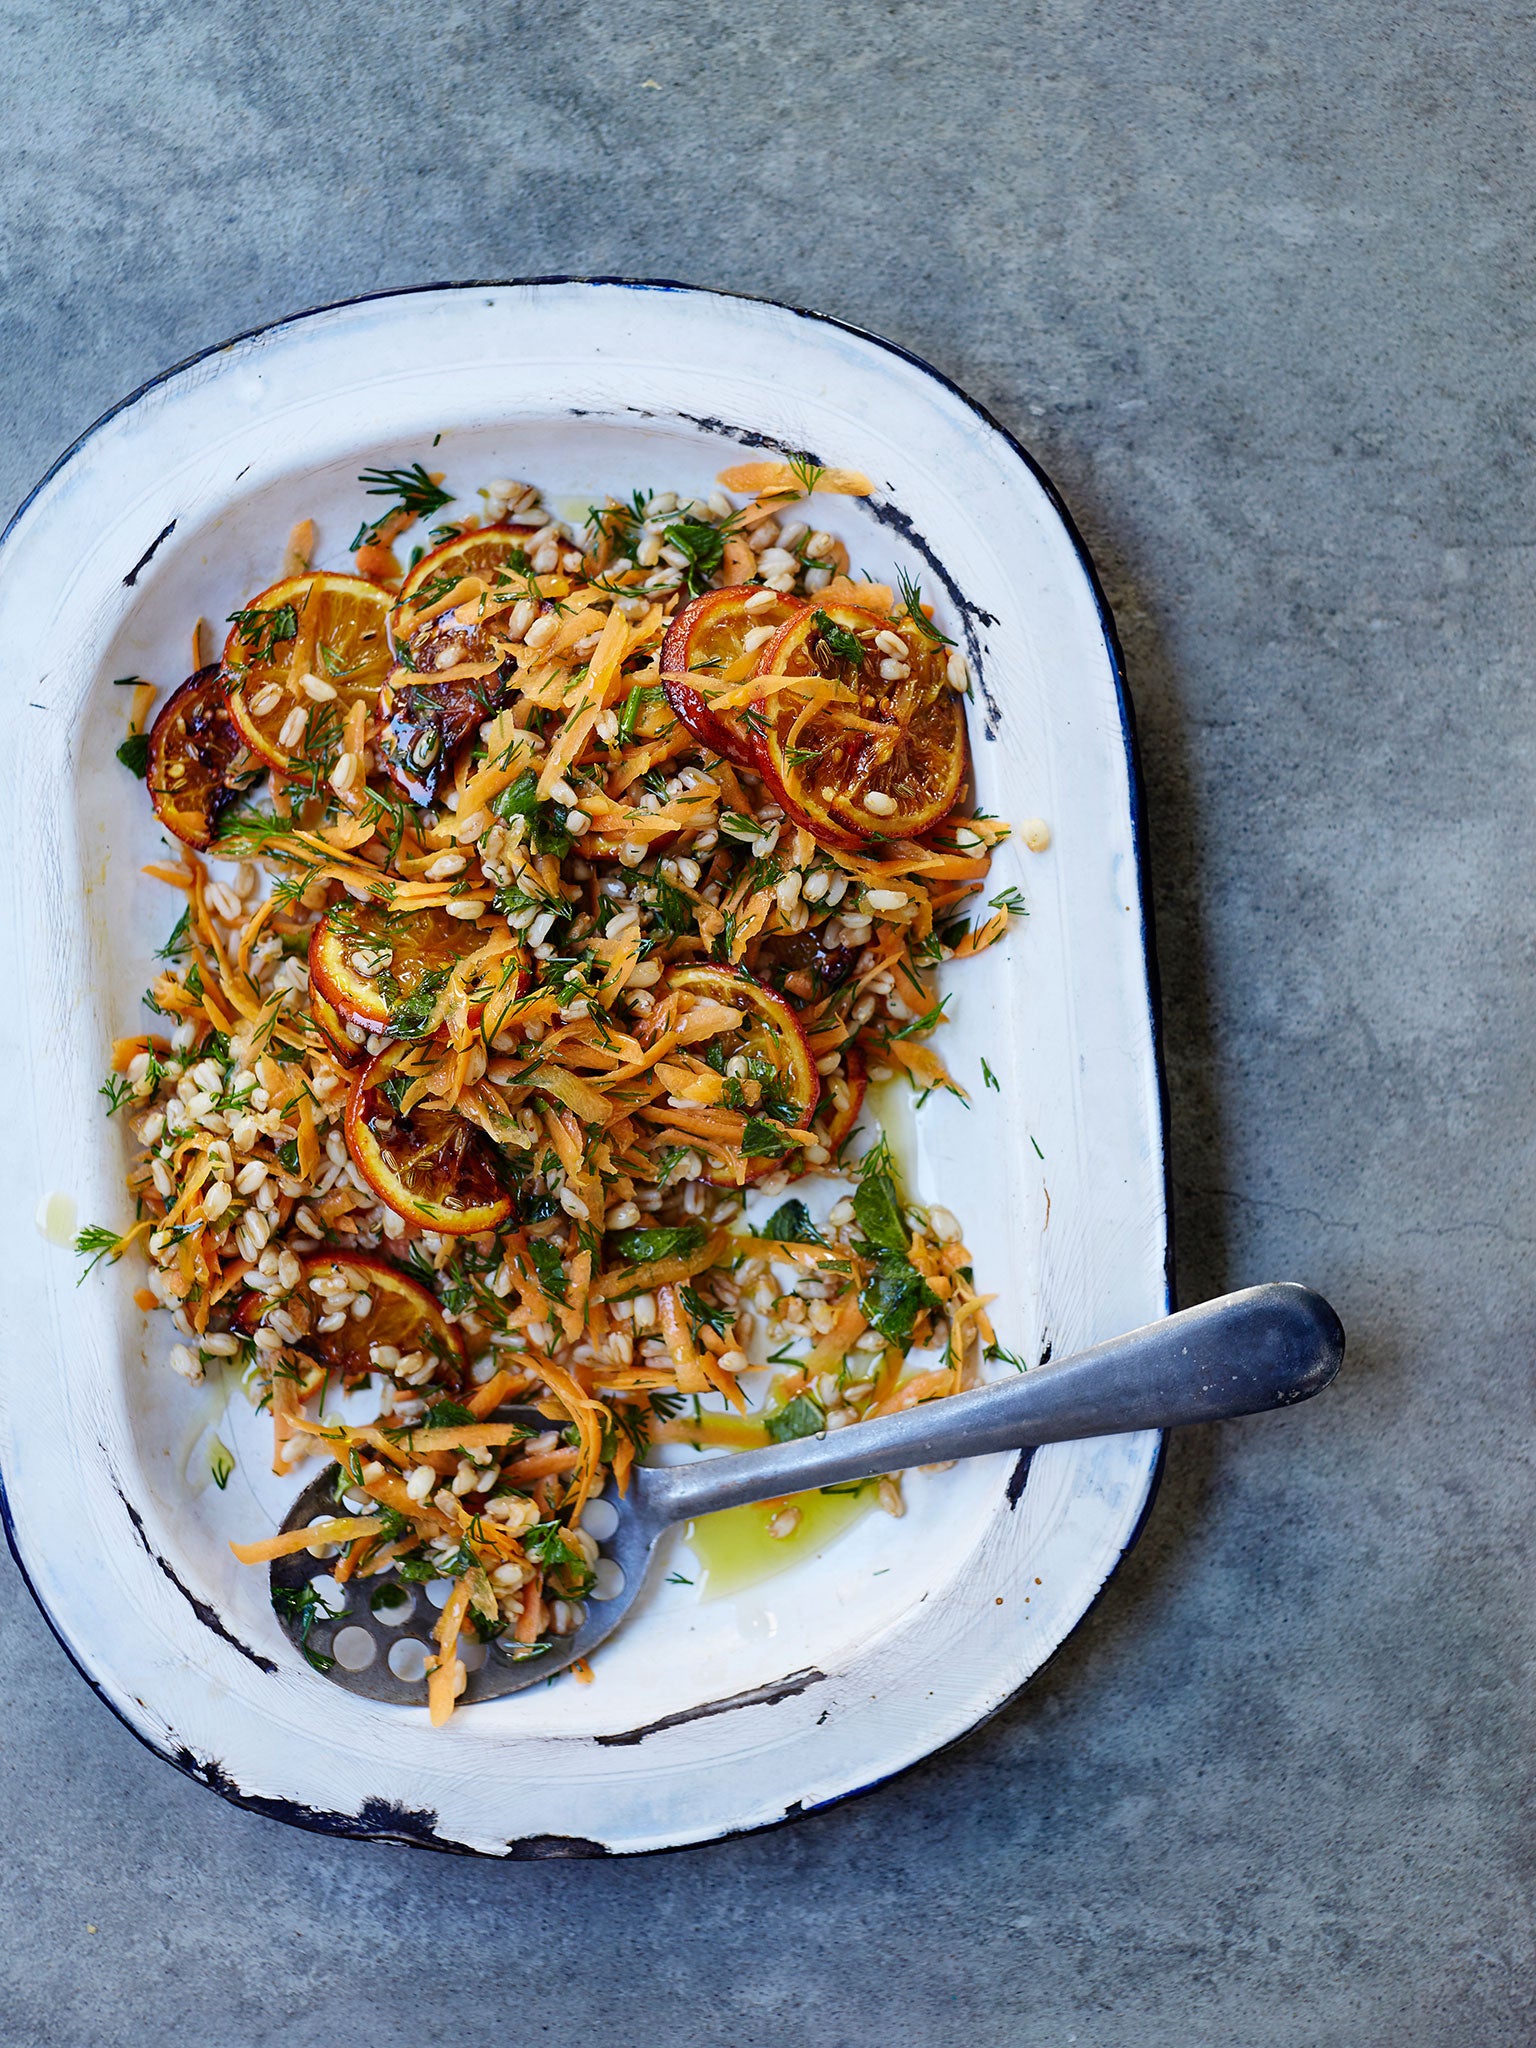 Spelt with roasted spiced oranges, carrot and herbs